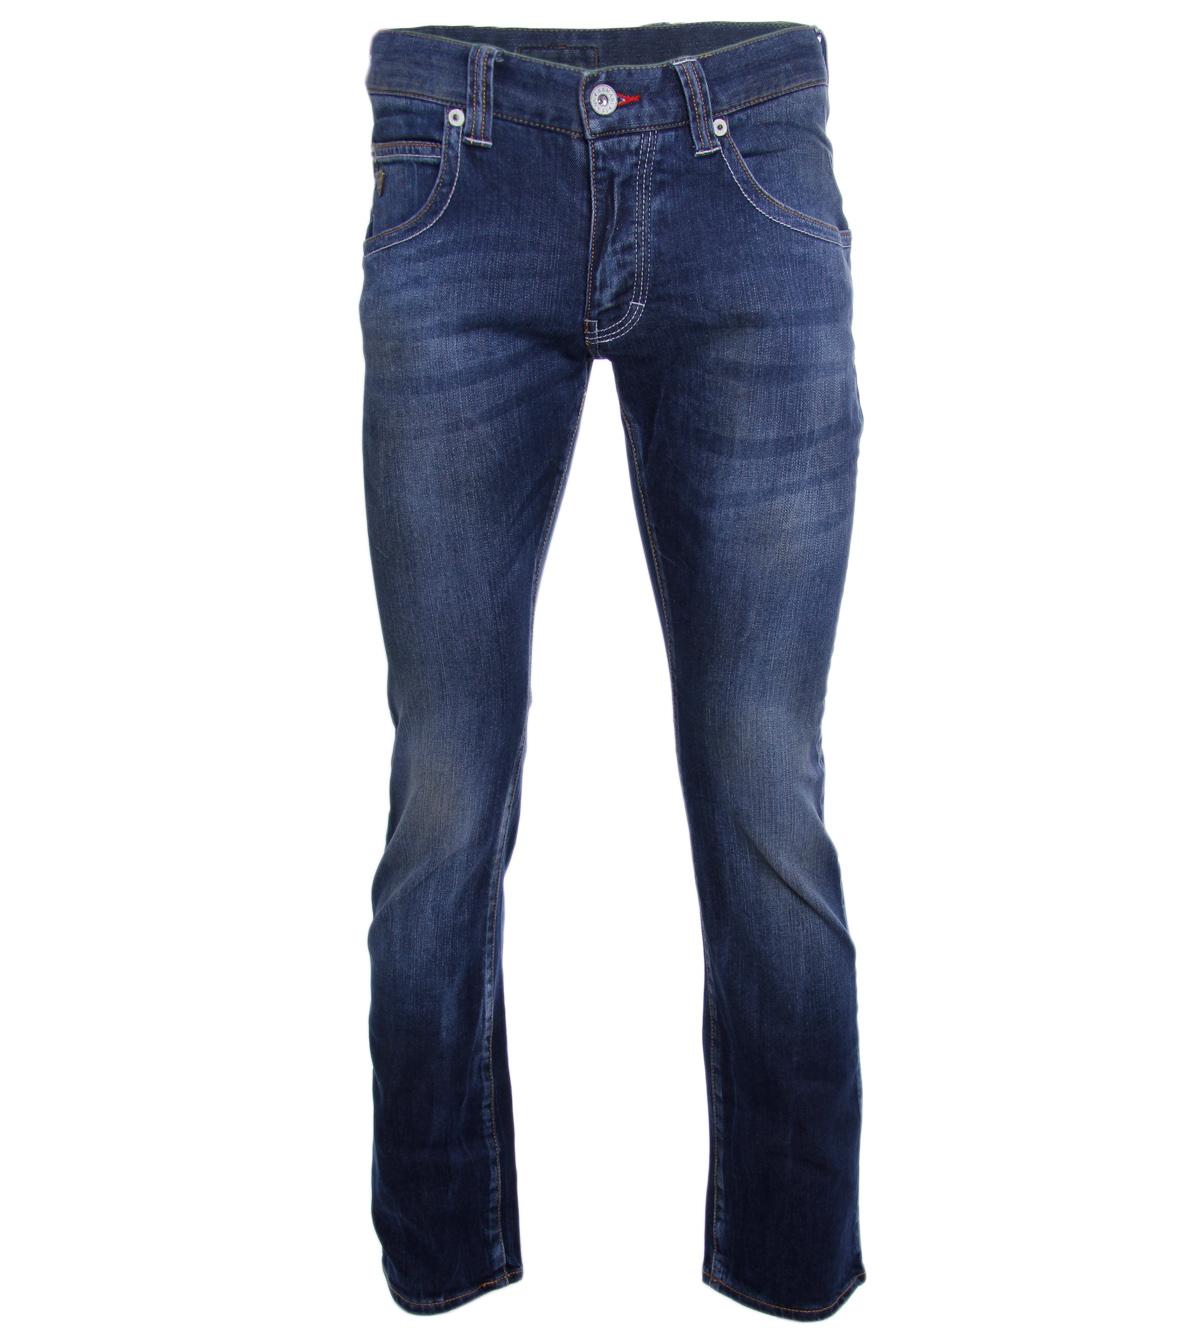 Foto Armani Jeans Blue Heavily Washed/Faded Denim Jeans